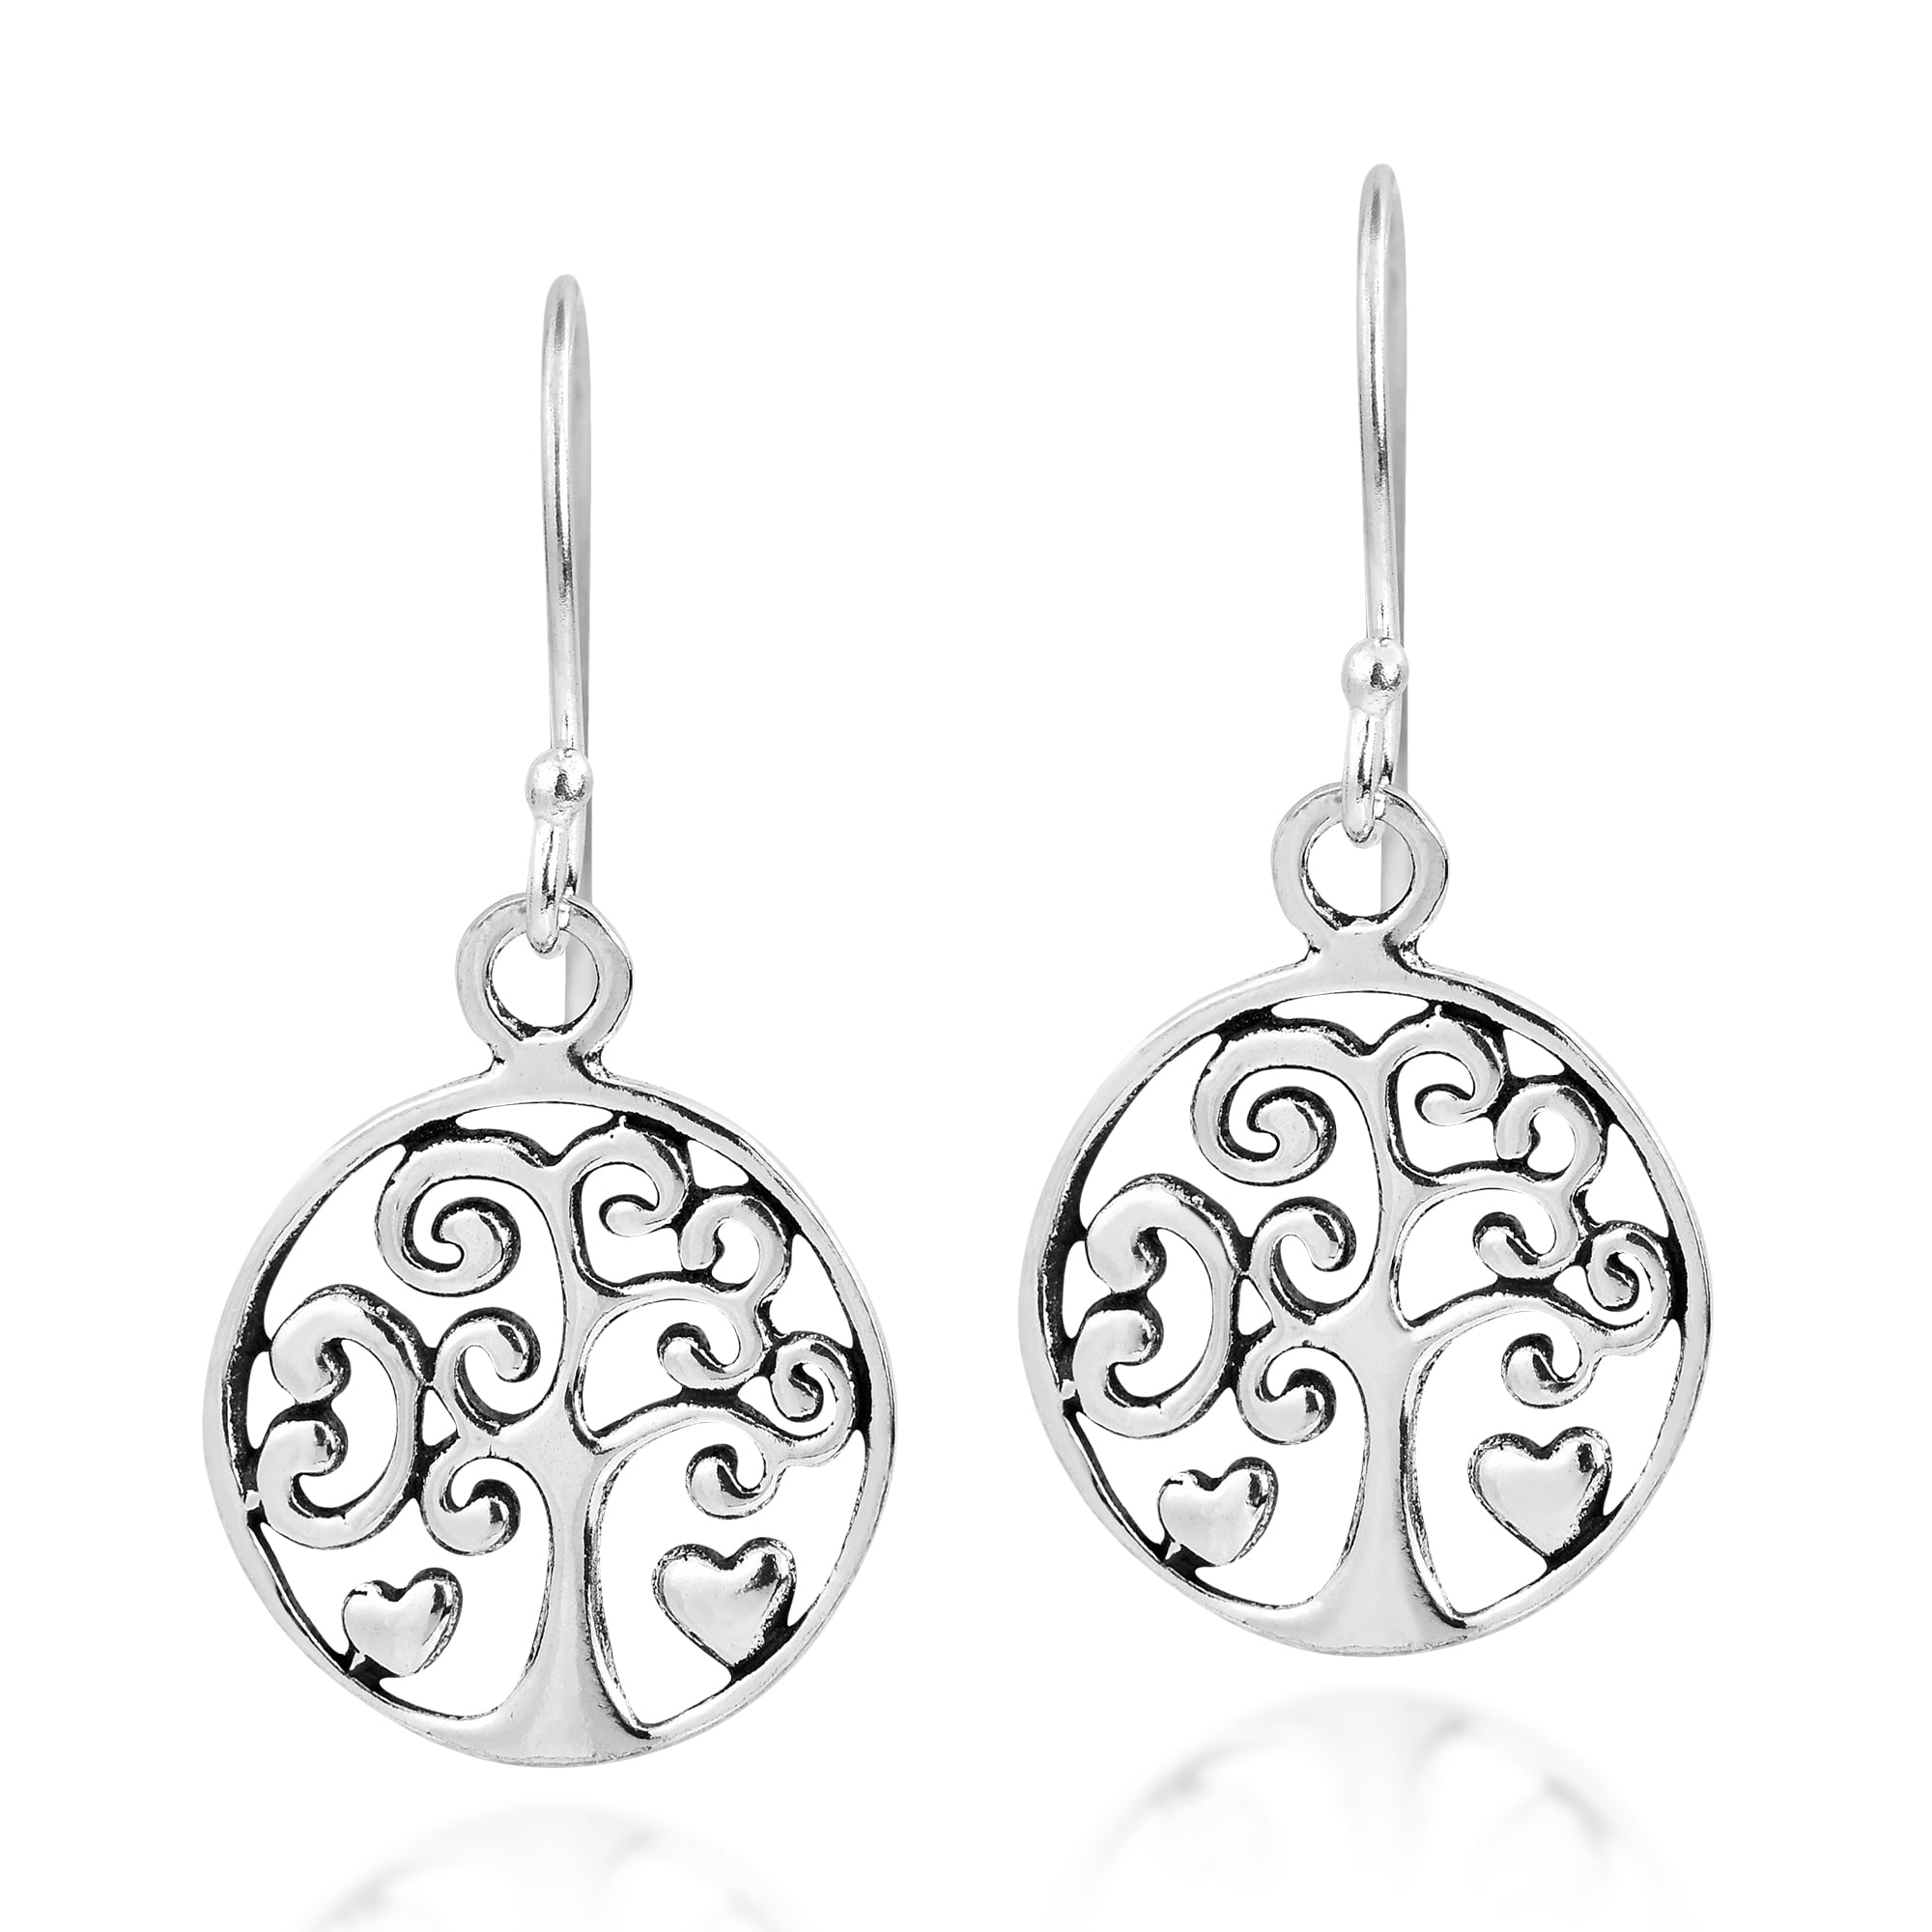 Celtic Tree of Life and Heart  Earrings on 925 Silver Hooks....FREE POSTAGE